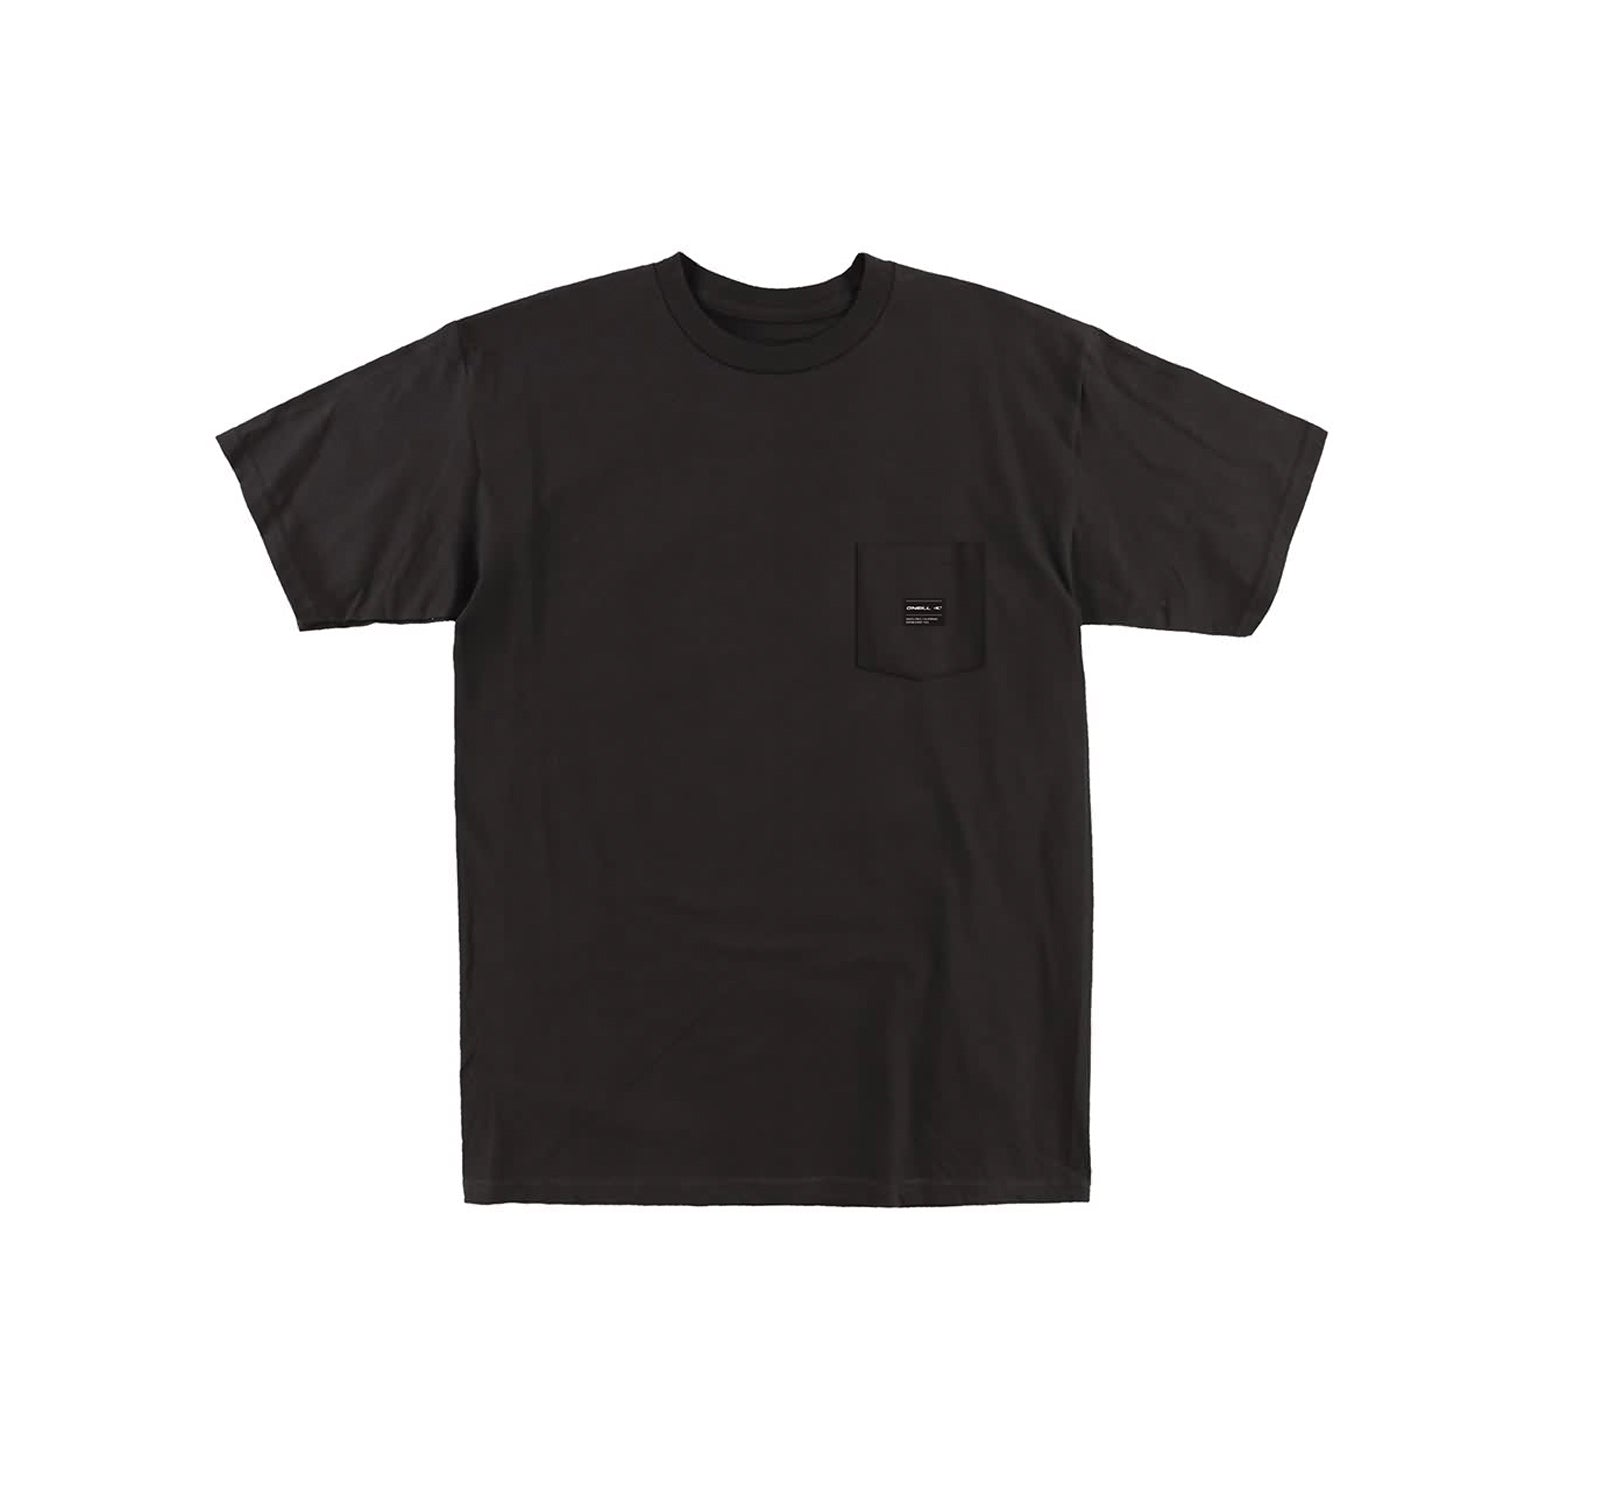 O'Neill Stitched Men's S/S T-Shirt